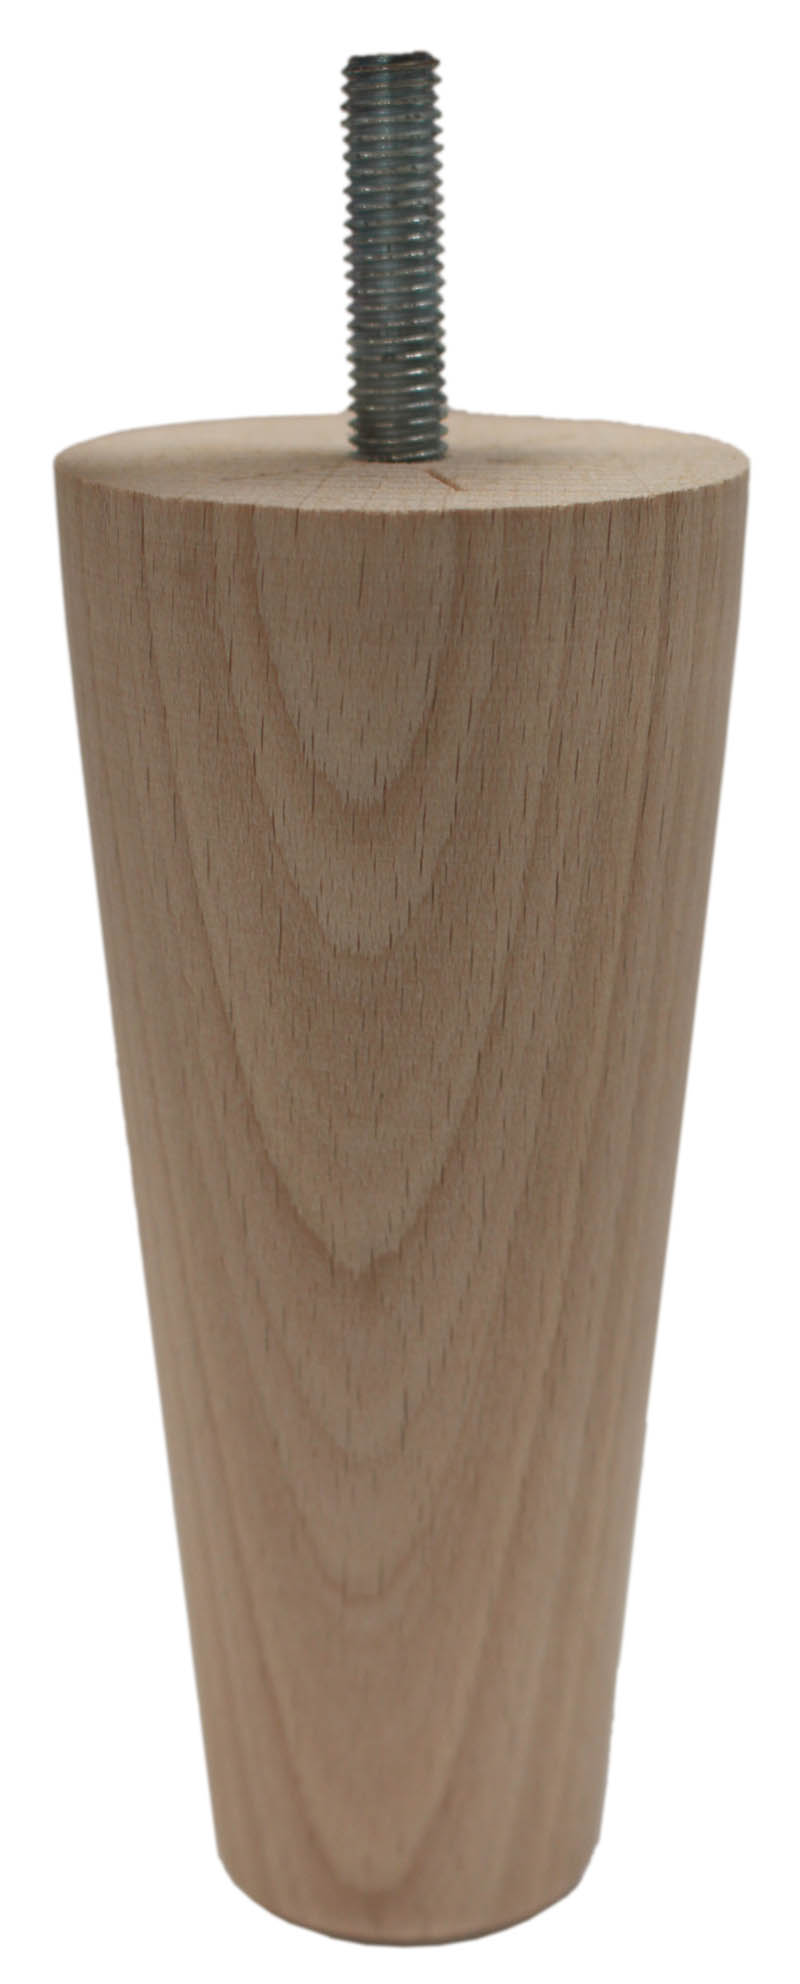 Chloe Tapered Wooden Legs - Raw Finish - Set of 4